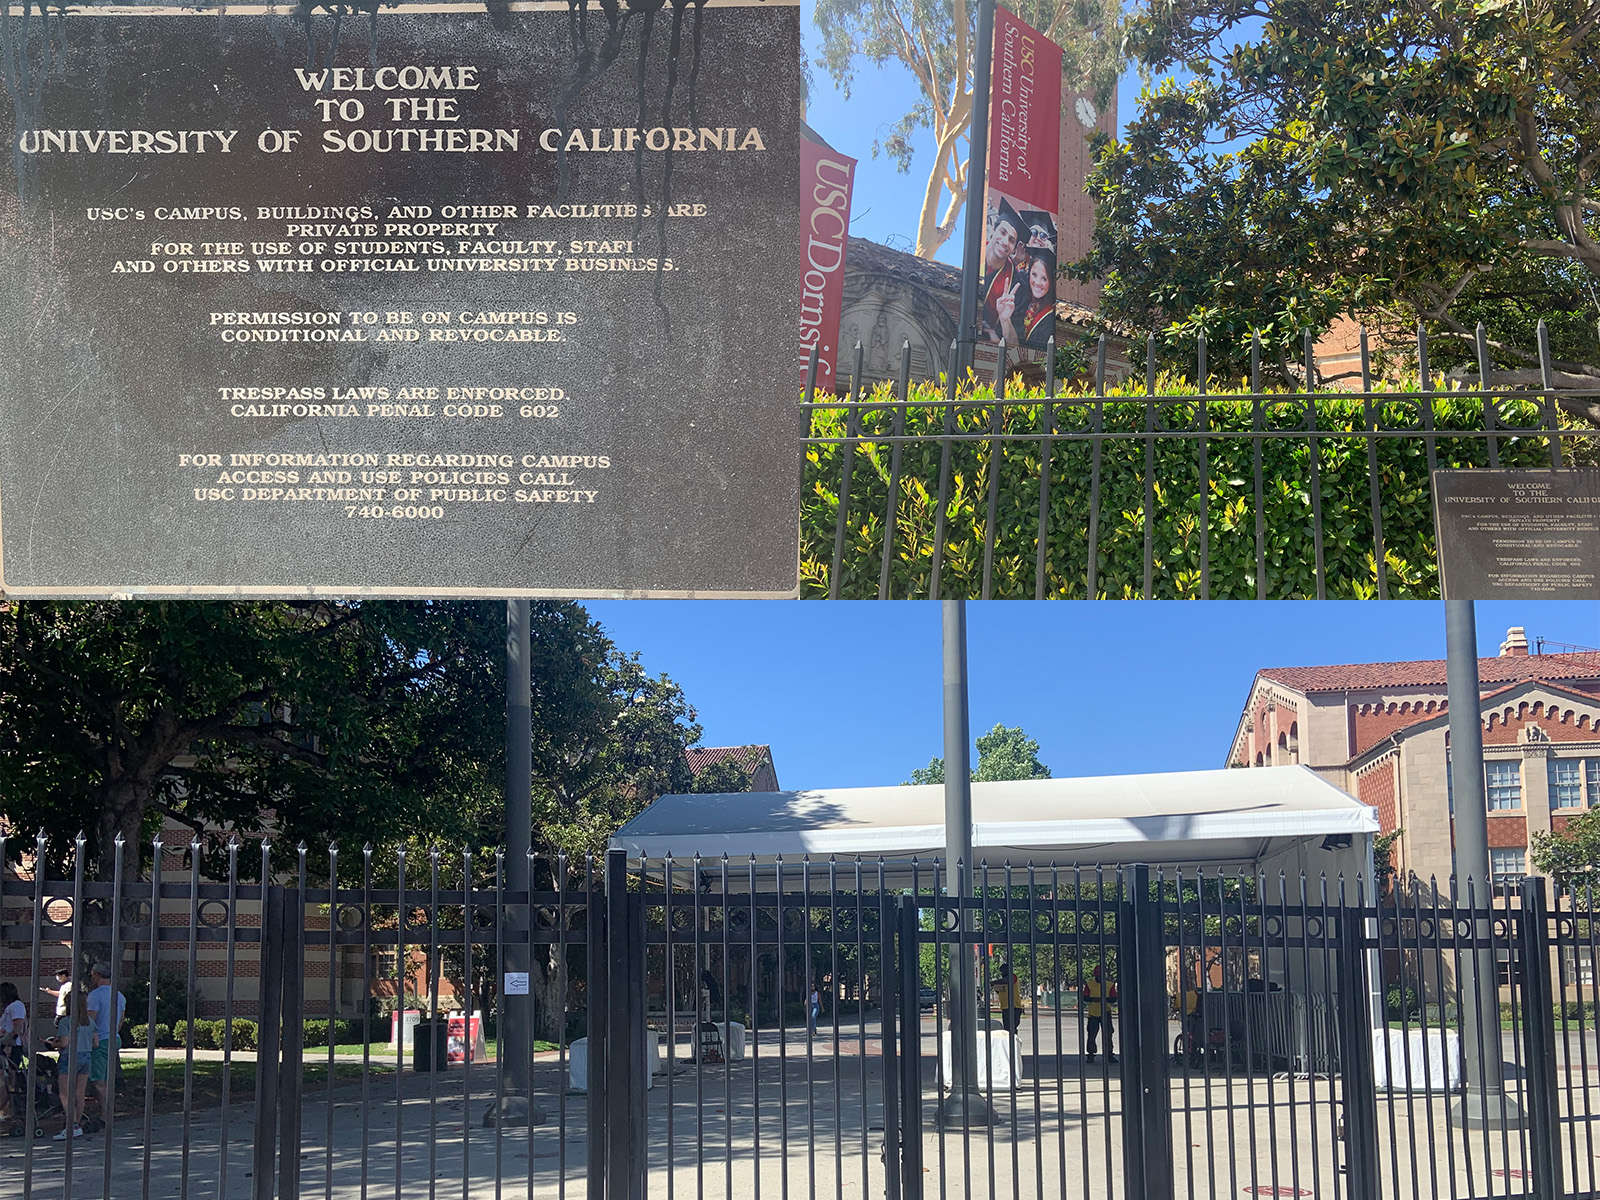 Two images of a seven-foot-tall iron fence topped with spikes surrounding a college campus. A third image provides a closeup of a sign on the fence, which reads, “Welcome to the University of Southern California. USC’s campus, buildings, and other facilities are private property for the use of students, faculty, staff, and others with official university business. Permission to be on campus is conditional and revocable. Trespass laws are enforced. California Penal Code 602. For information regarding campus access and use policies call USC Department of Public Safety 740-6000.”